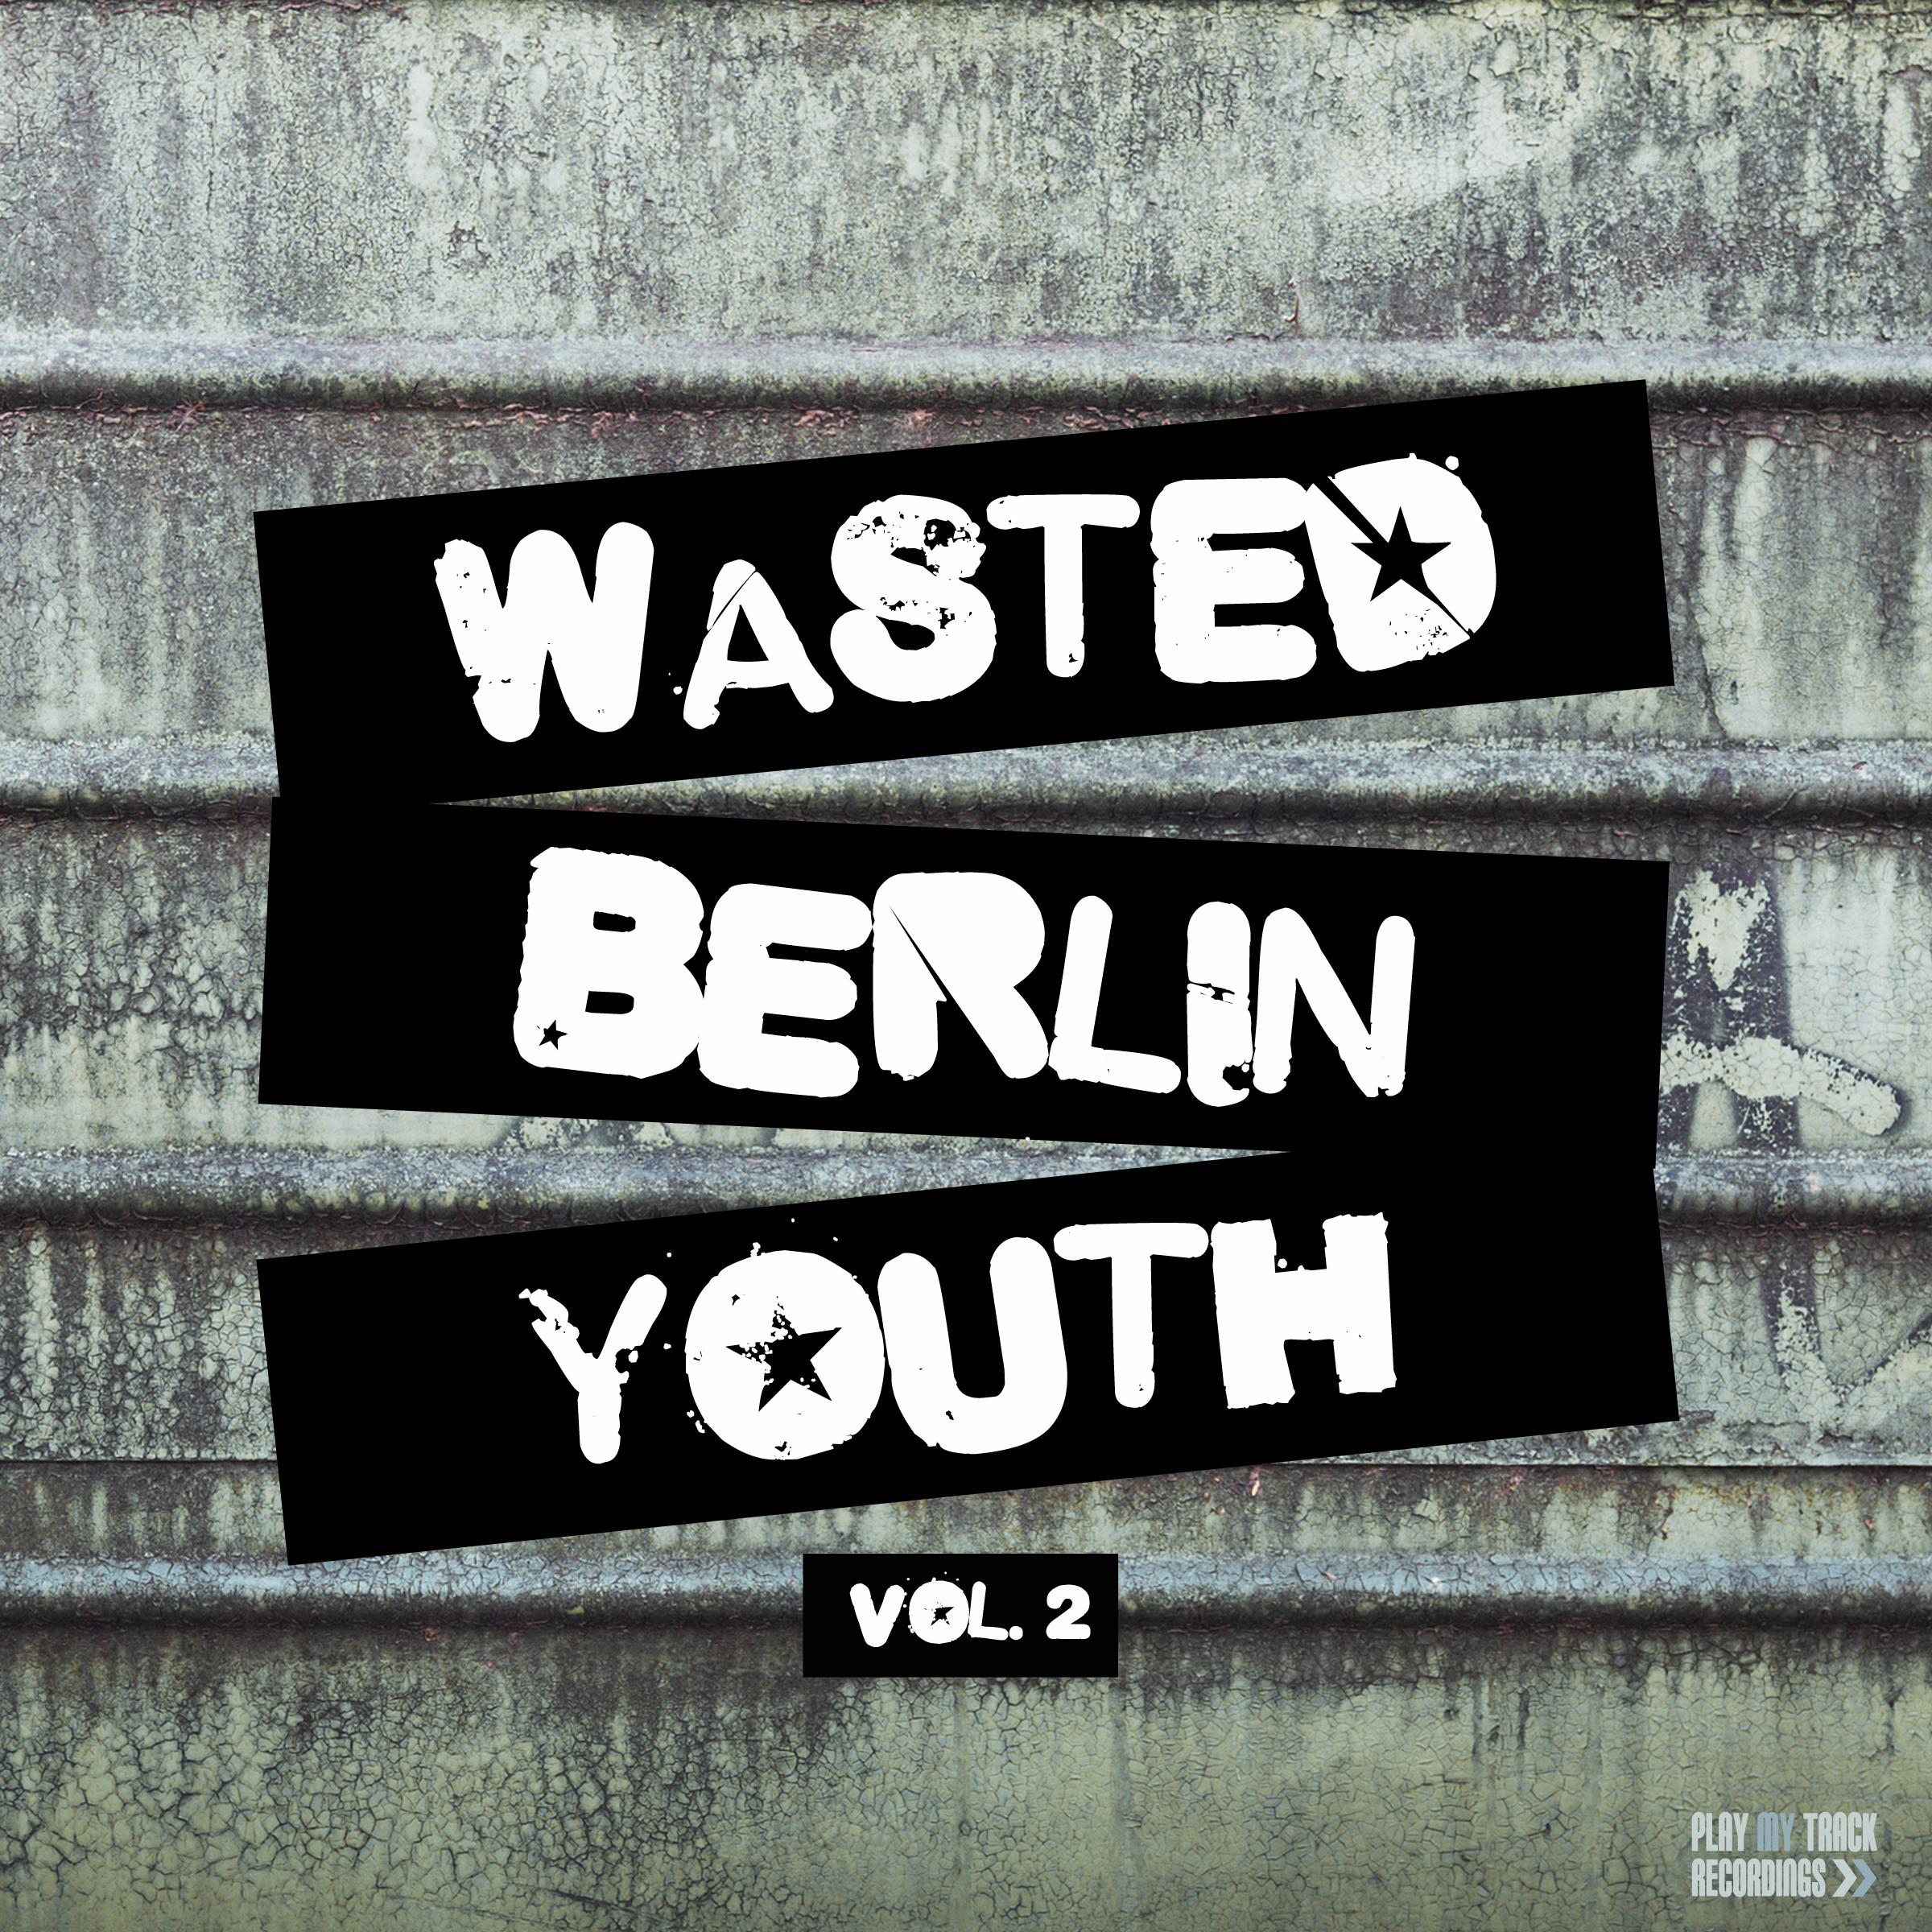 Wasted Berlin Youth, Vol. 2